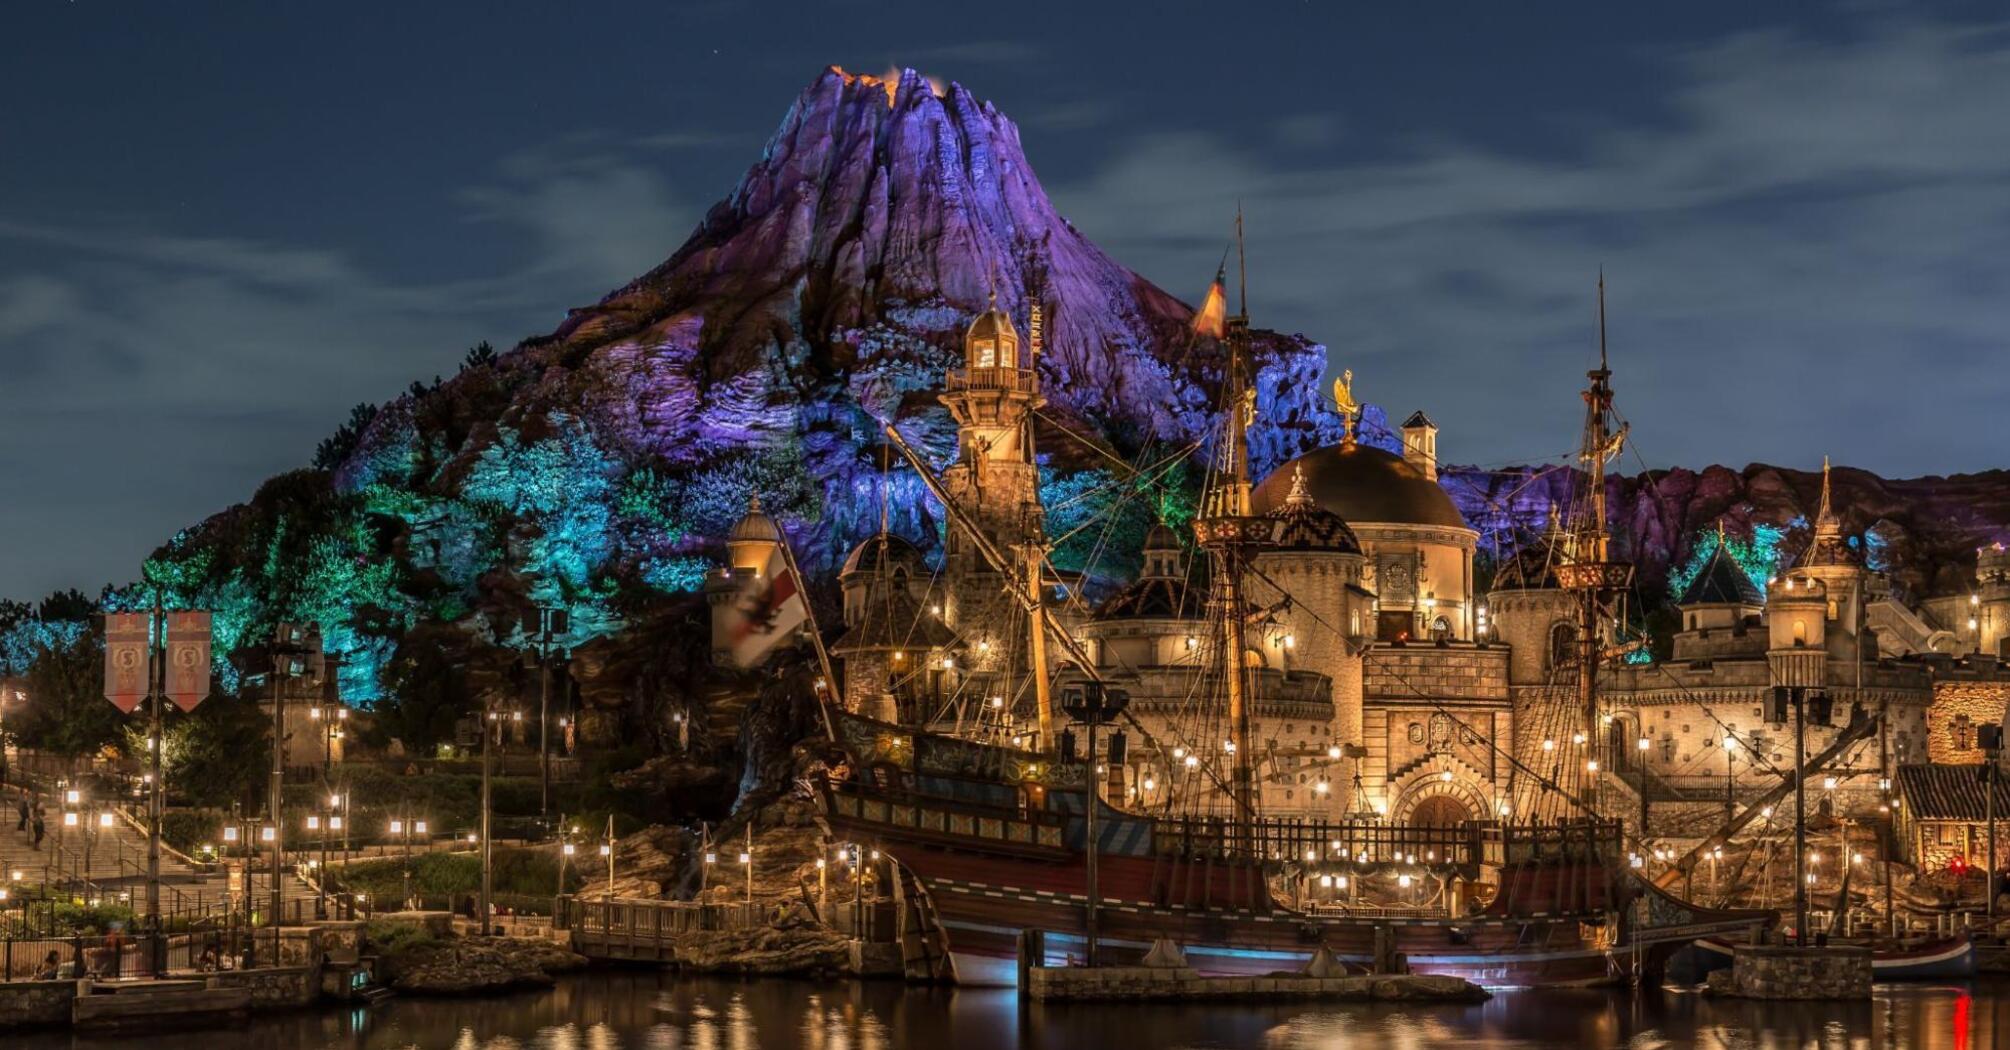 Nighttime view of a themed entertainment park with illuminated buildings, a replica pirate ship, and a mountain backdrop